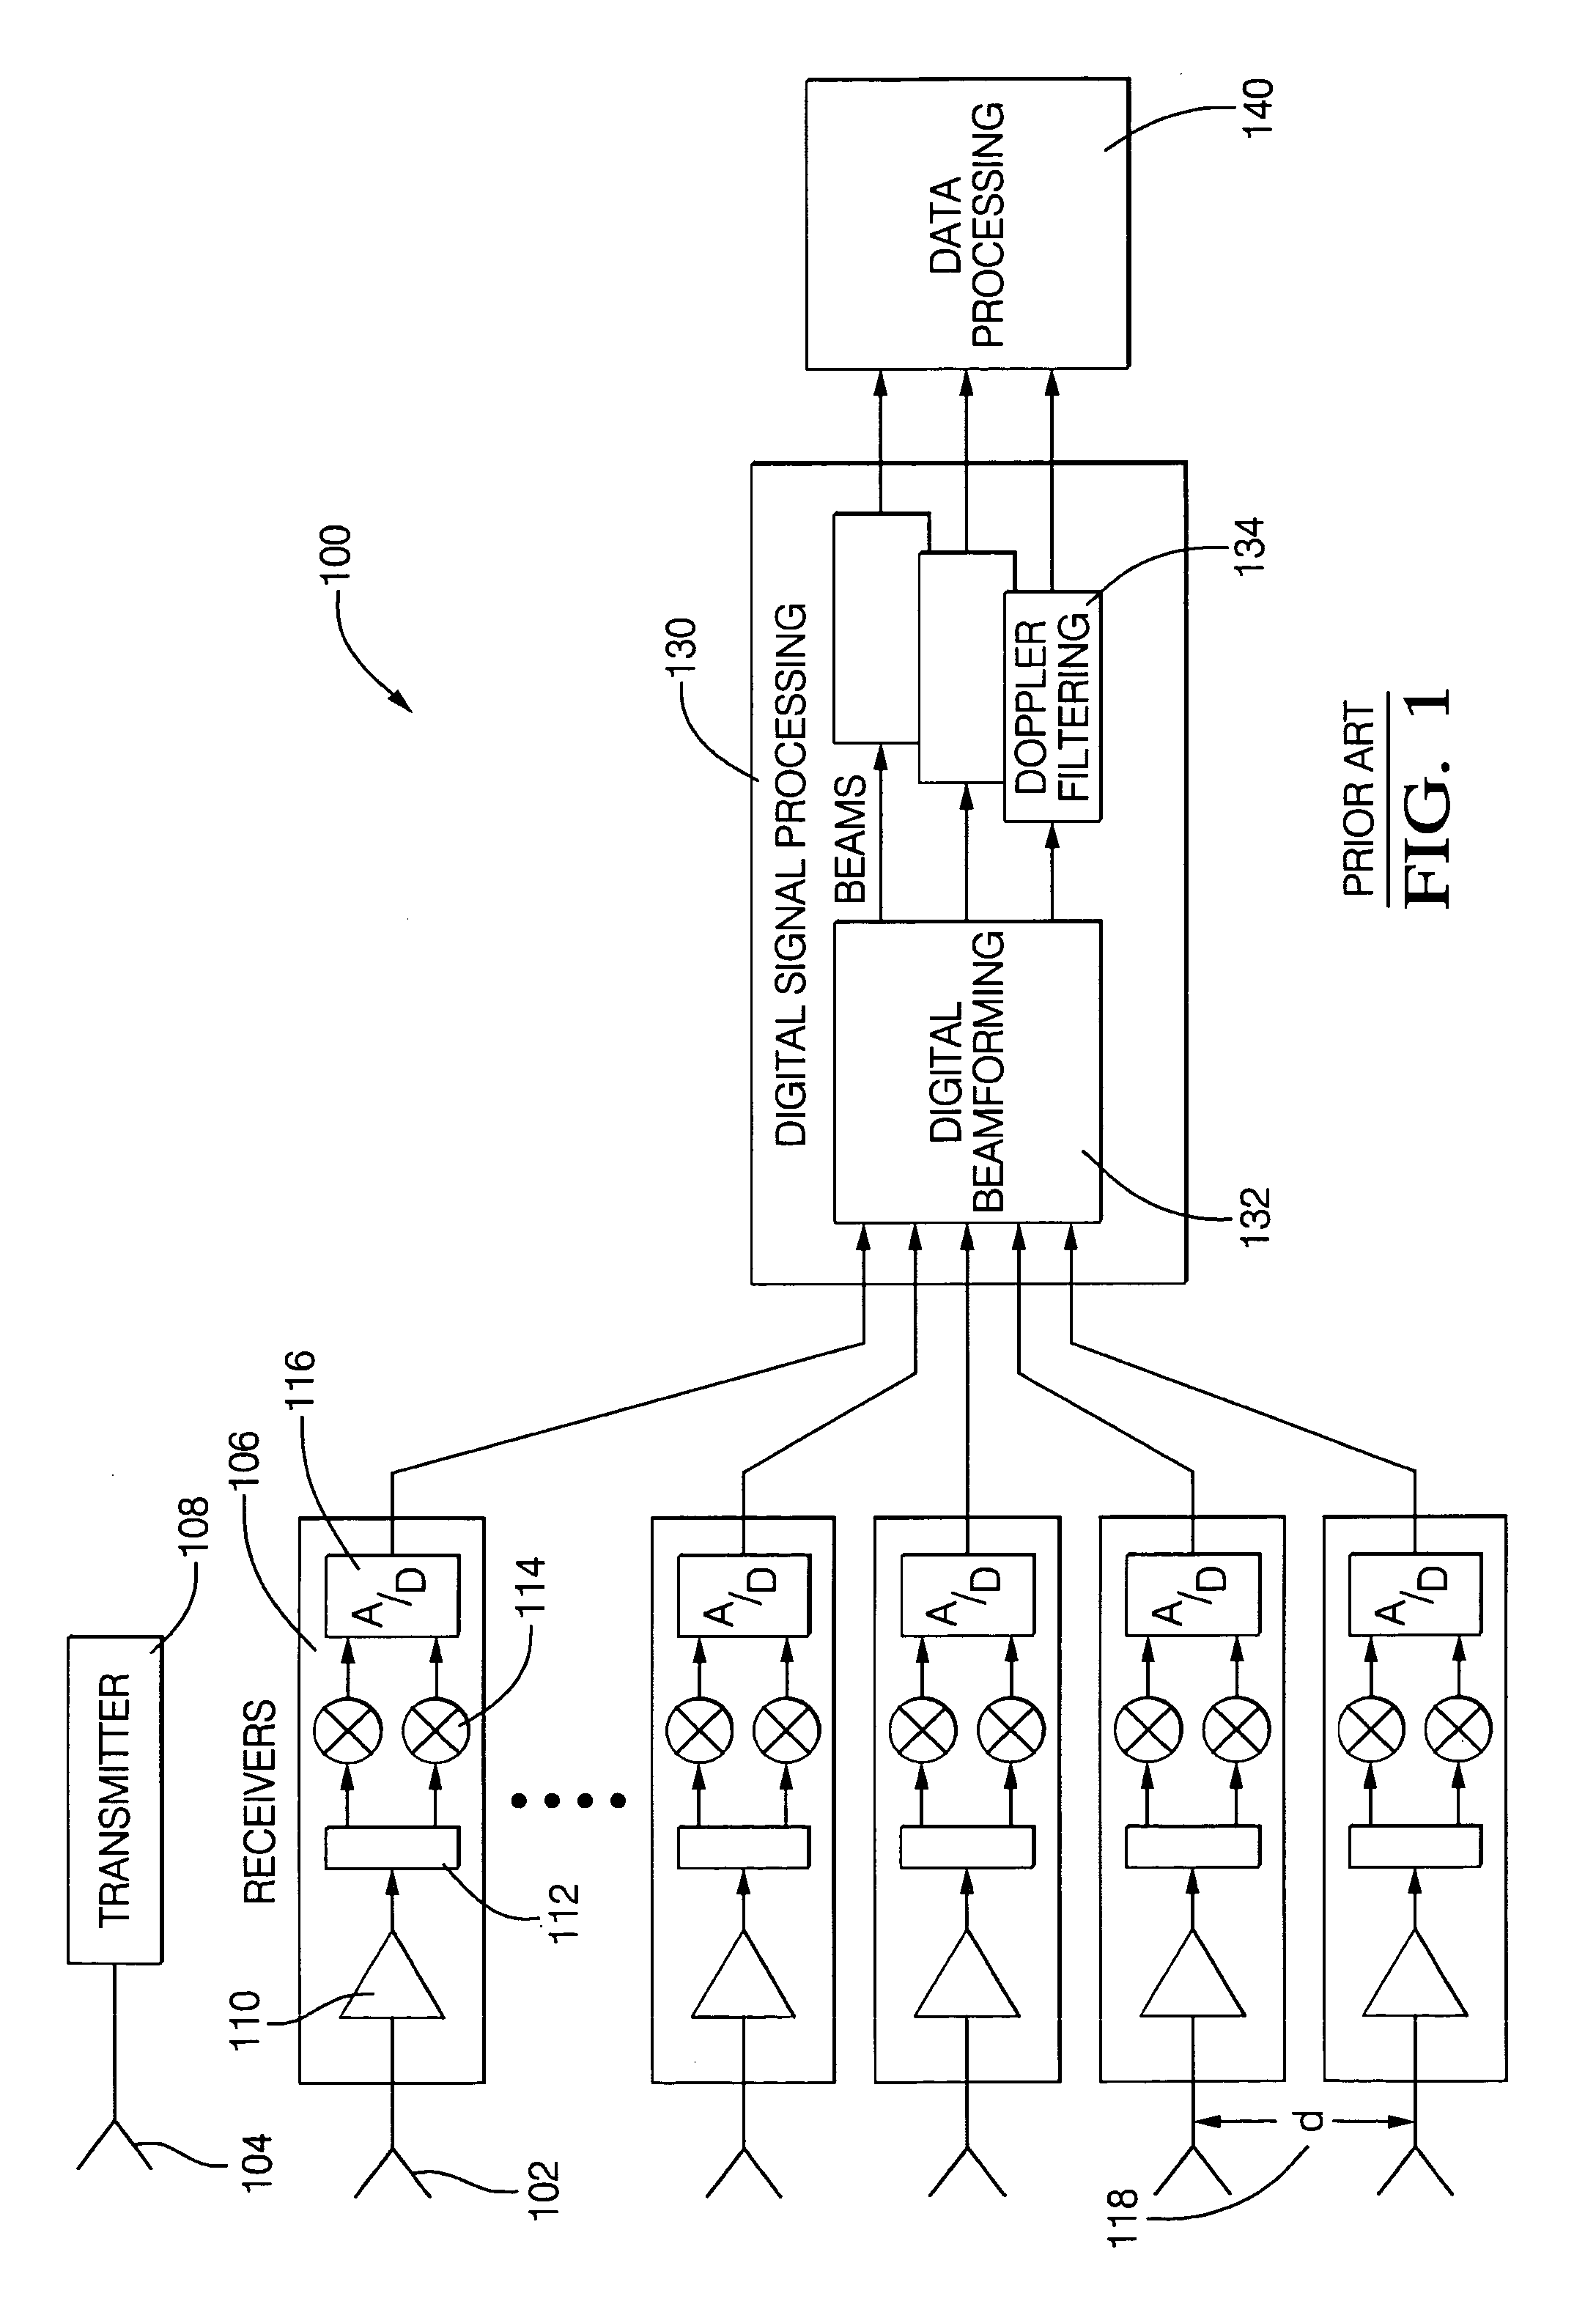 Digital beamforming for an electronically scanned radar system